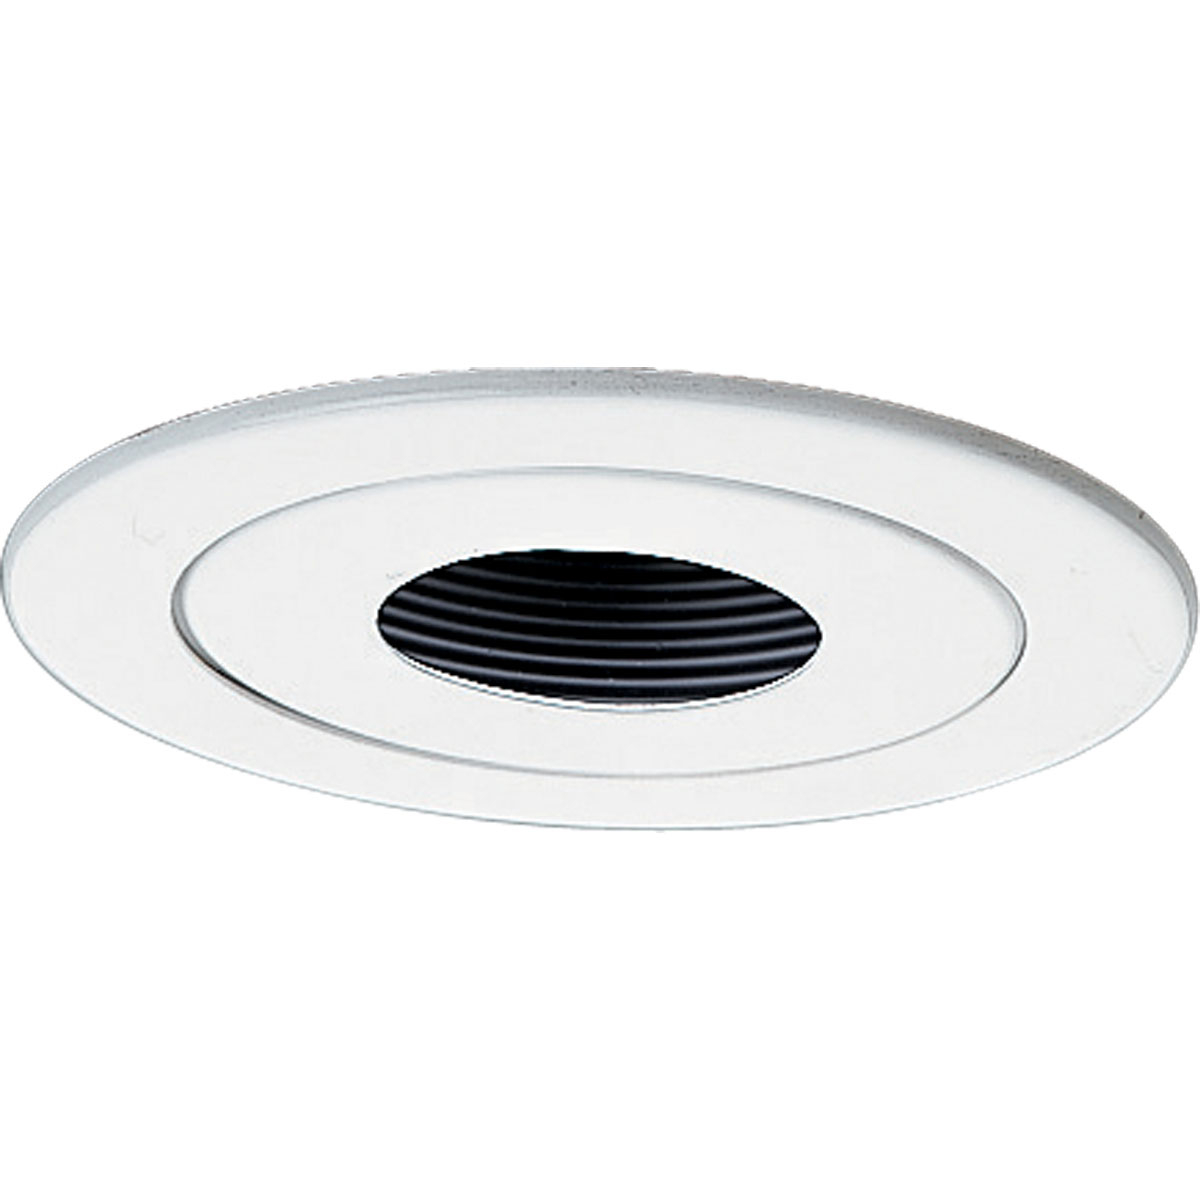 4 in Low Voltage Pinhole Spot trim in a White finish and bright white powder painted metal flange. All trims have 360 positioning. Lamps tilt 30 max.